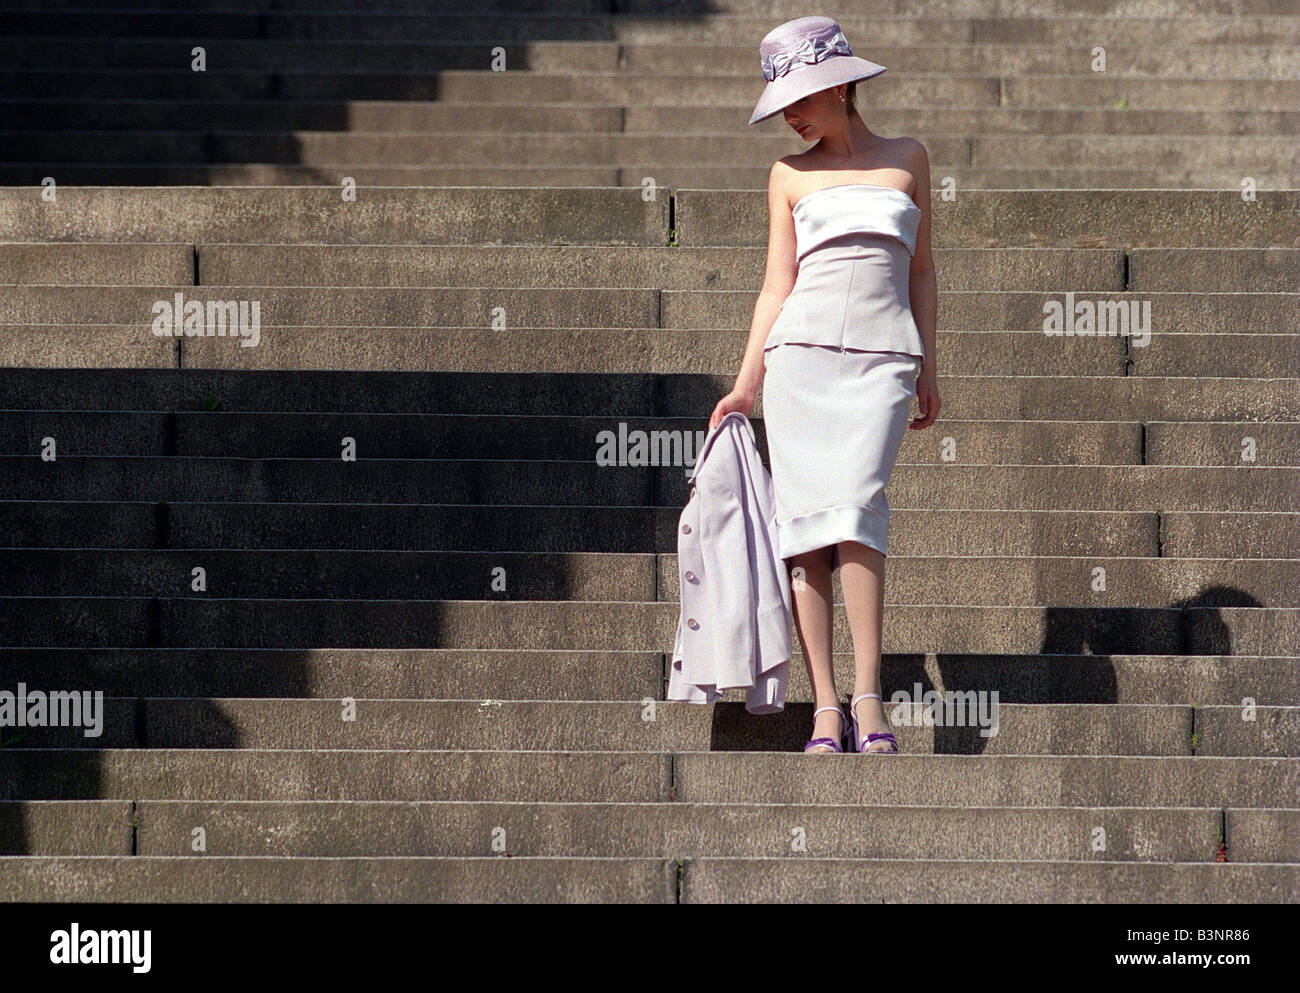 Summer suit fashion May 1999 Model wearing strapless lilac top and skirt by  Karen Millen hat from Debenhams and shoes Stock Photo - Alamy